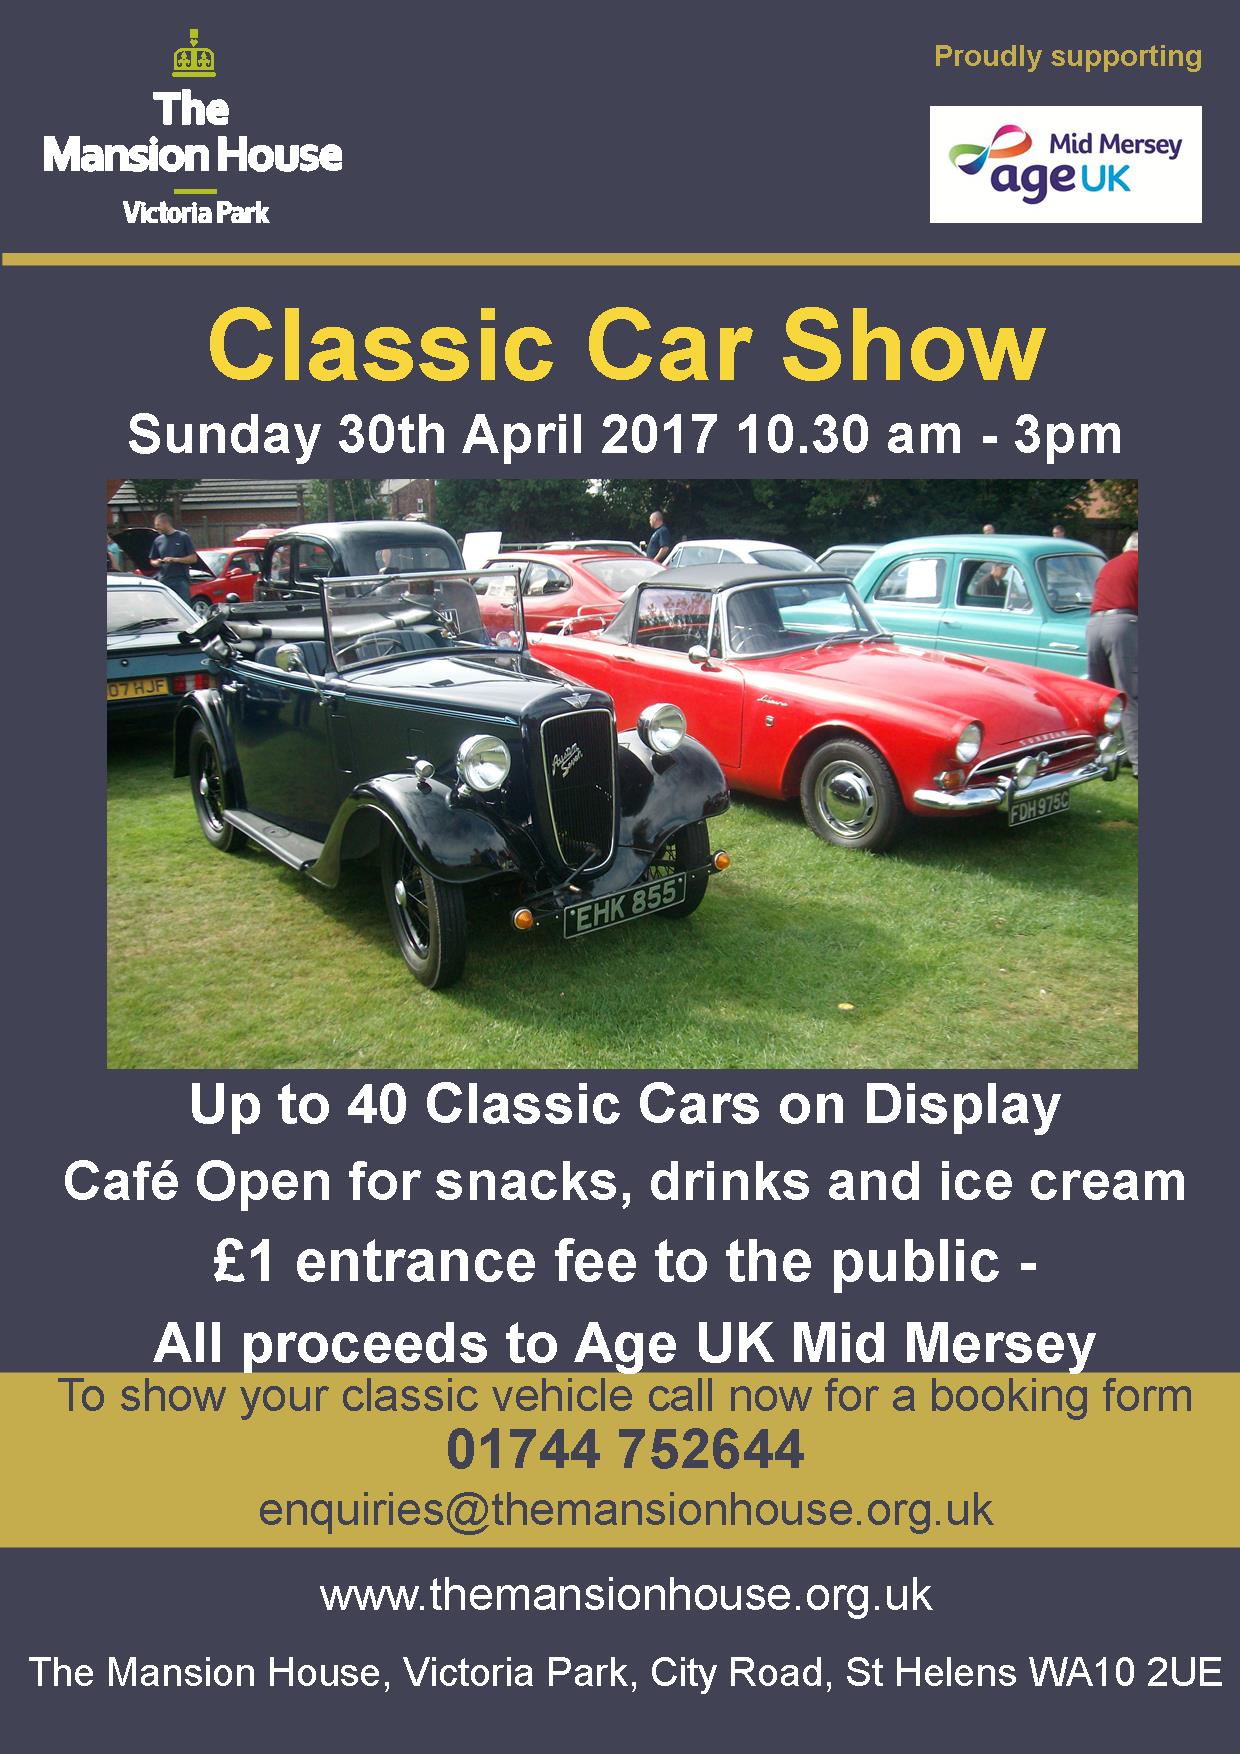 Victoria park stages classic car show - St Helens Star